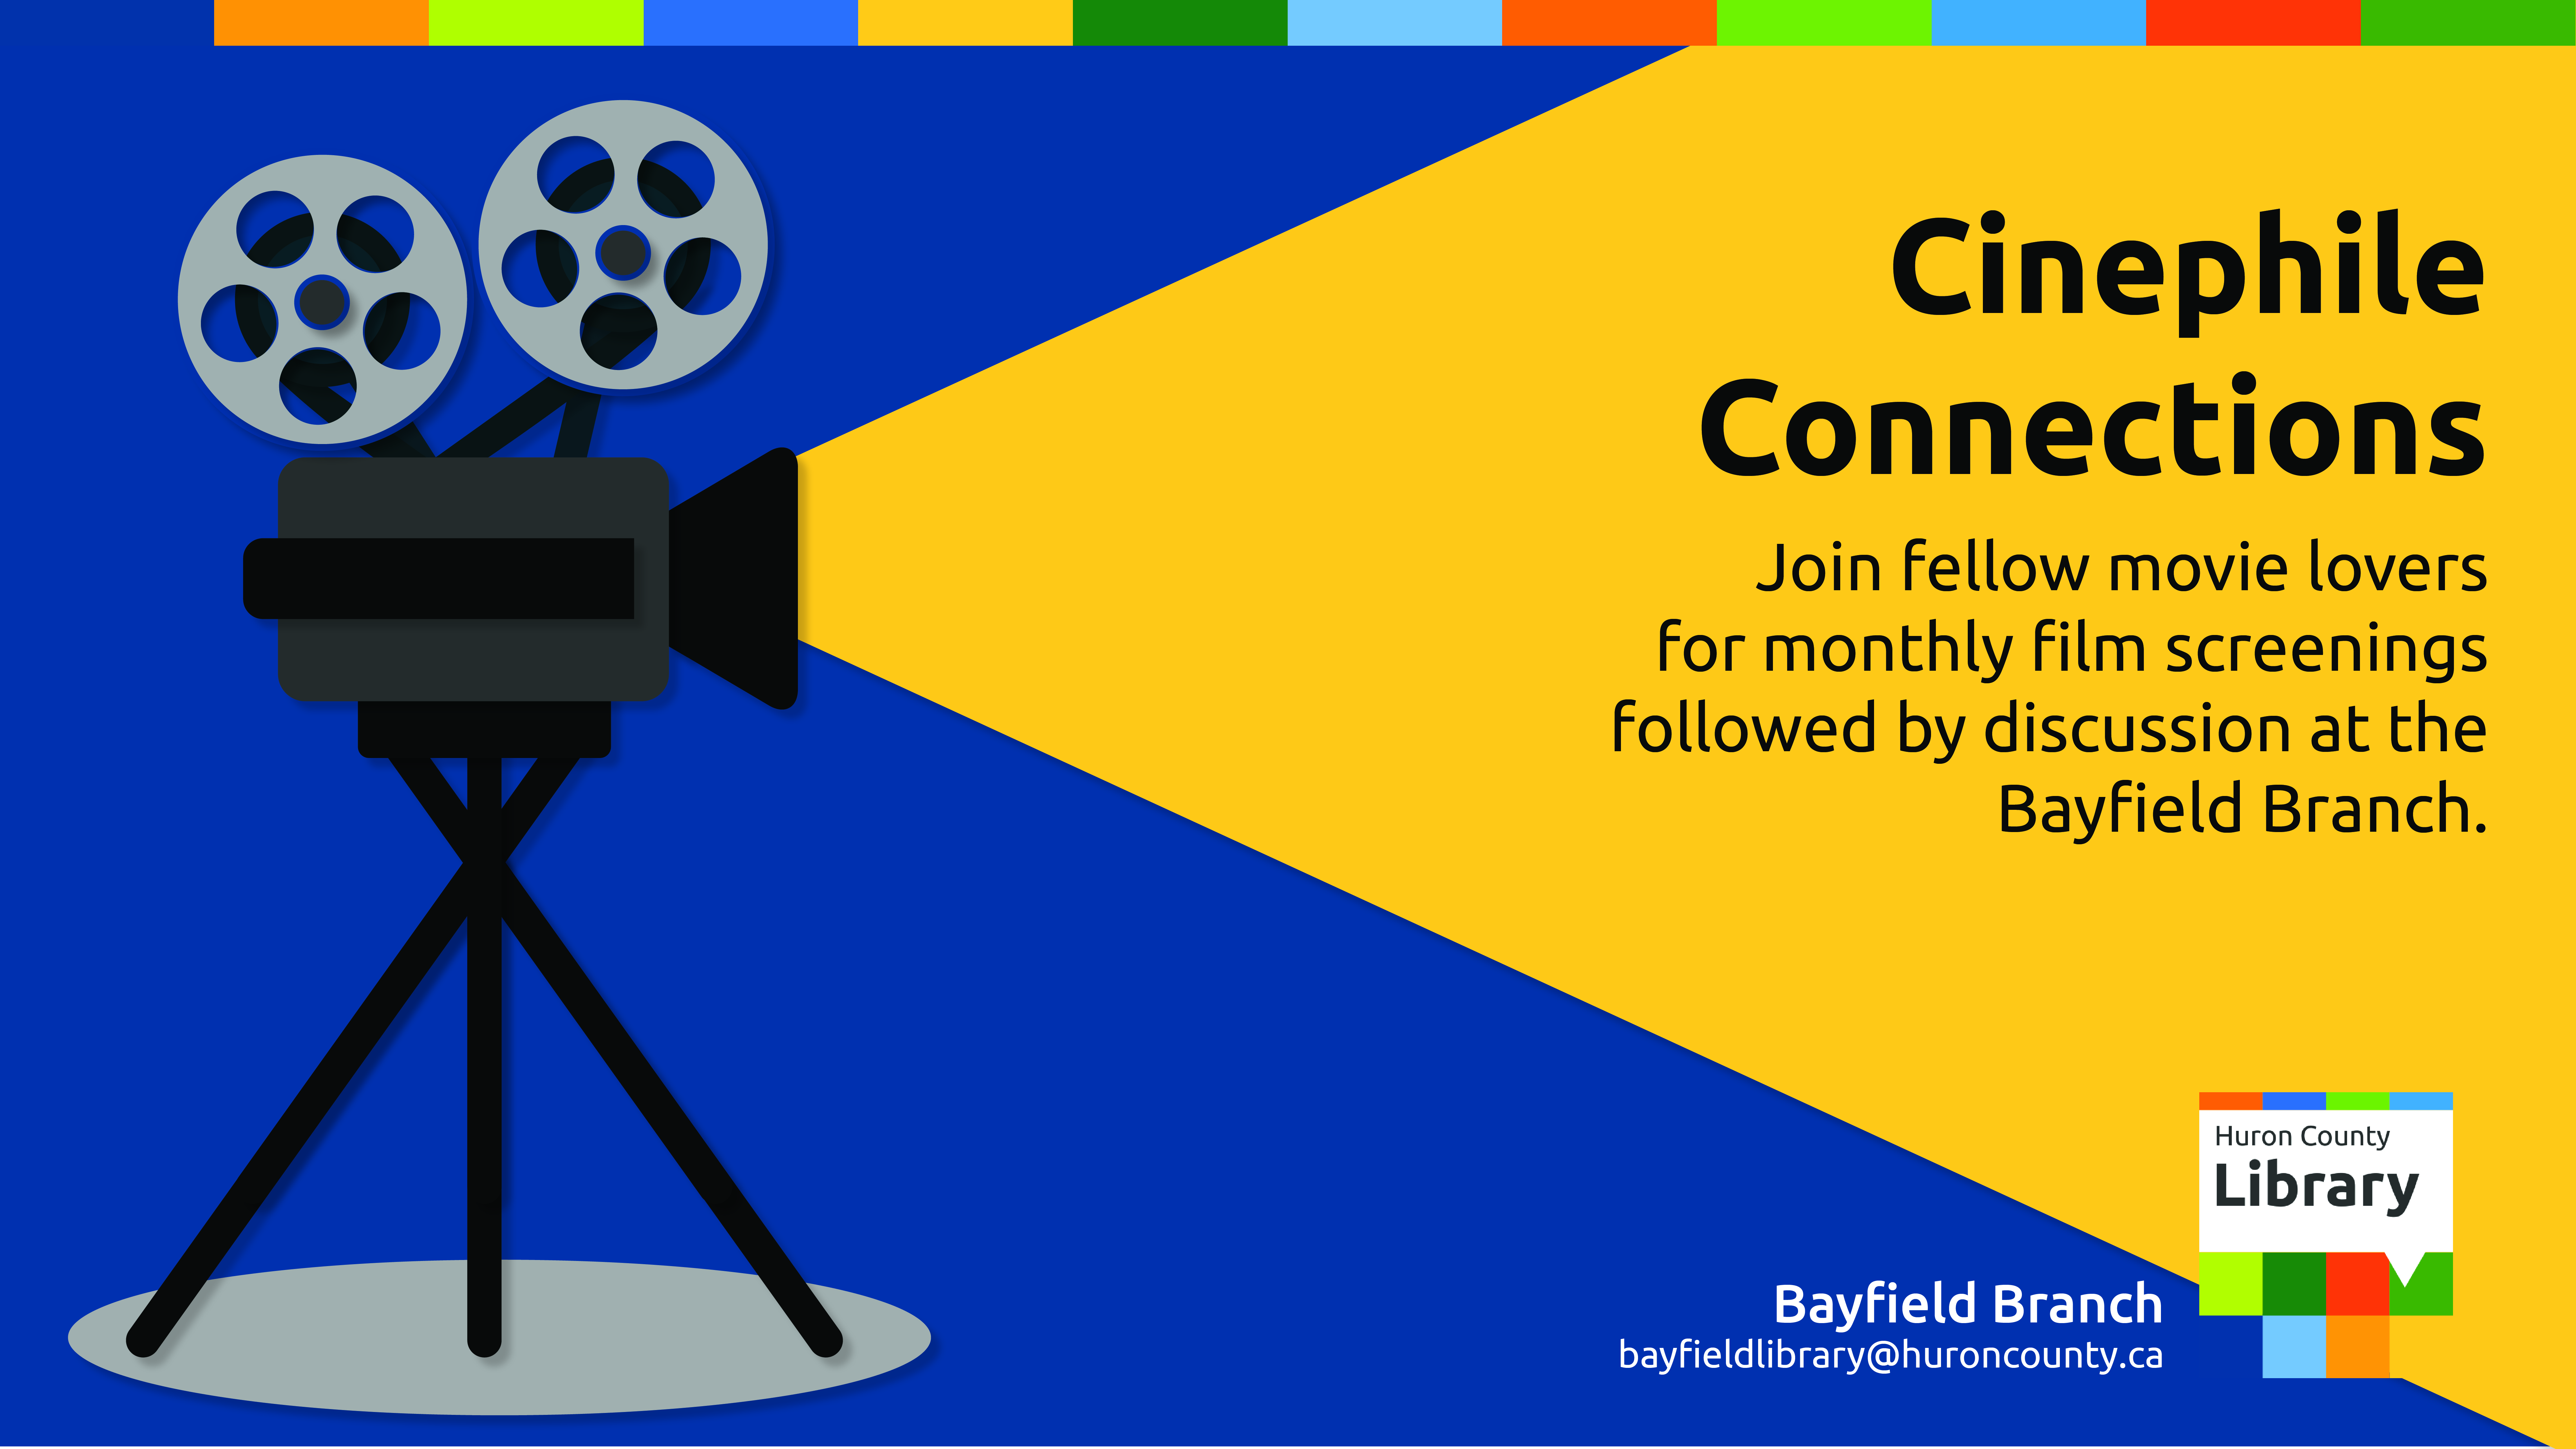 Illustration of a film projector with text promoting Cinephile Connections at Bayfield